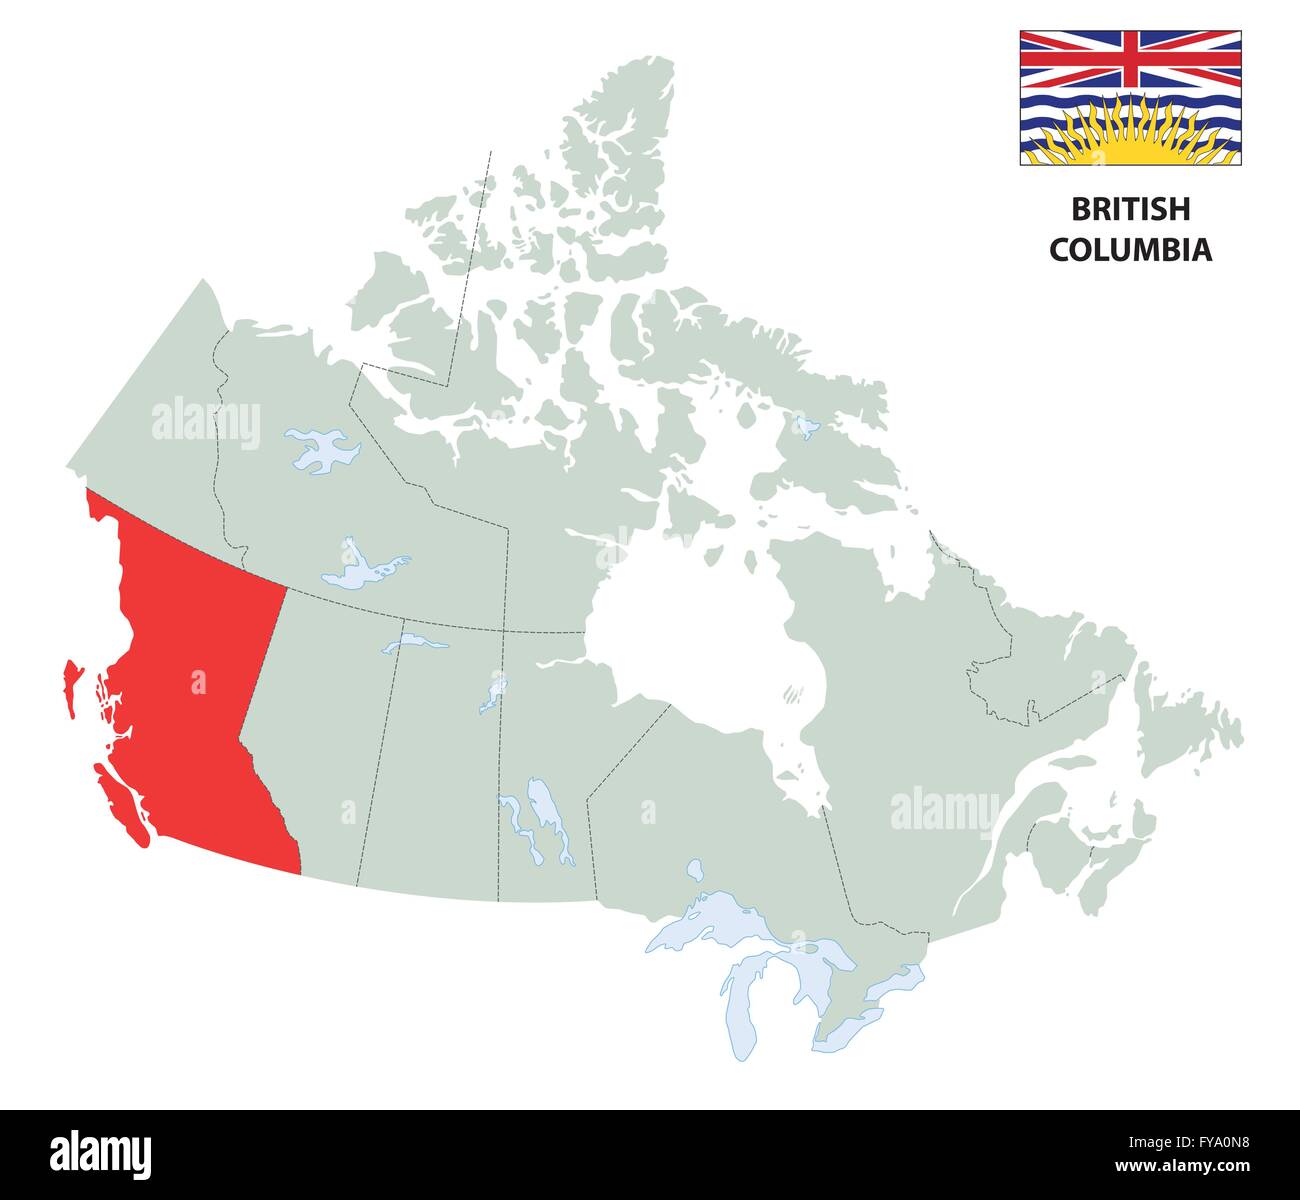 outline map of the Canadian province of British Columbia with flag